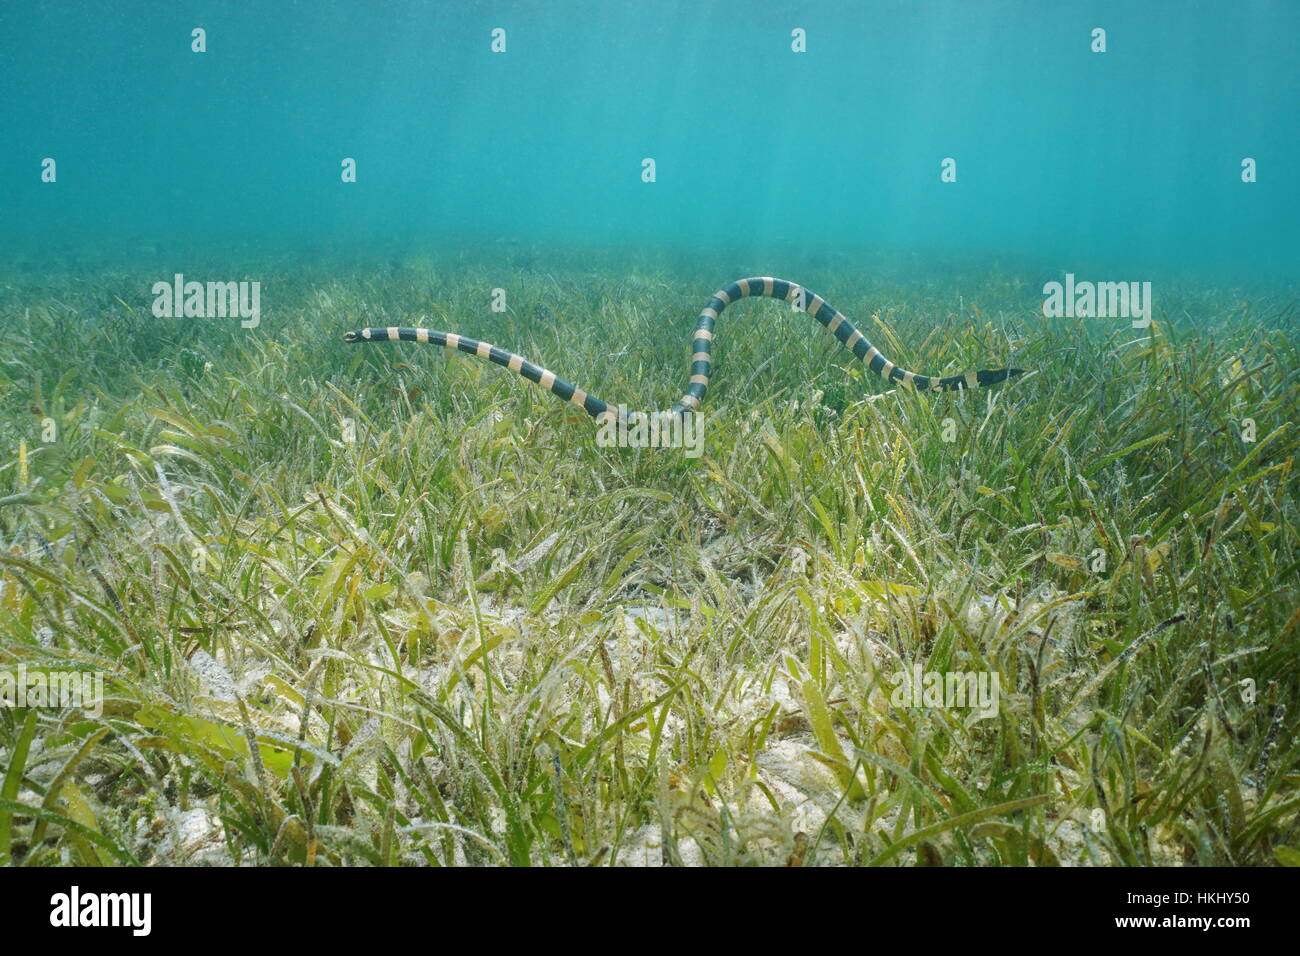 Sea snake underwater, banded sea krait, Laticauda colubrina, hunting on a grassy seabed, south Pacific ocean, New Caledonia Stock Photo